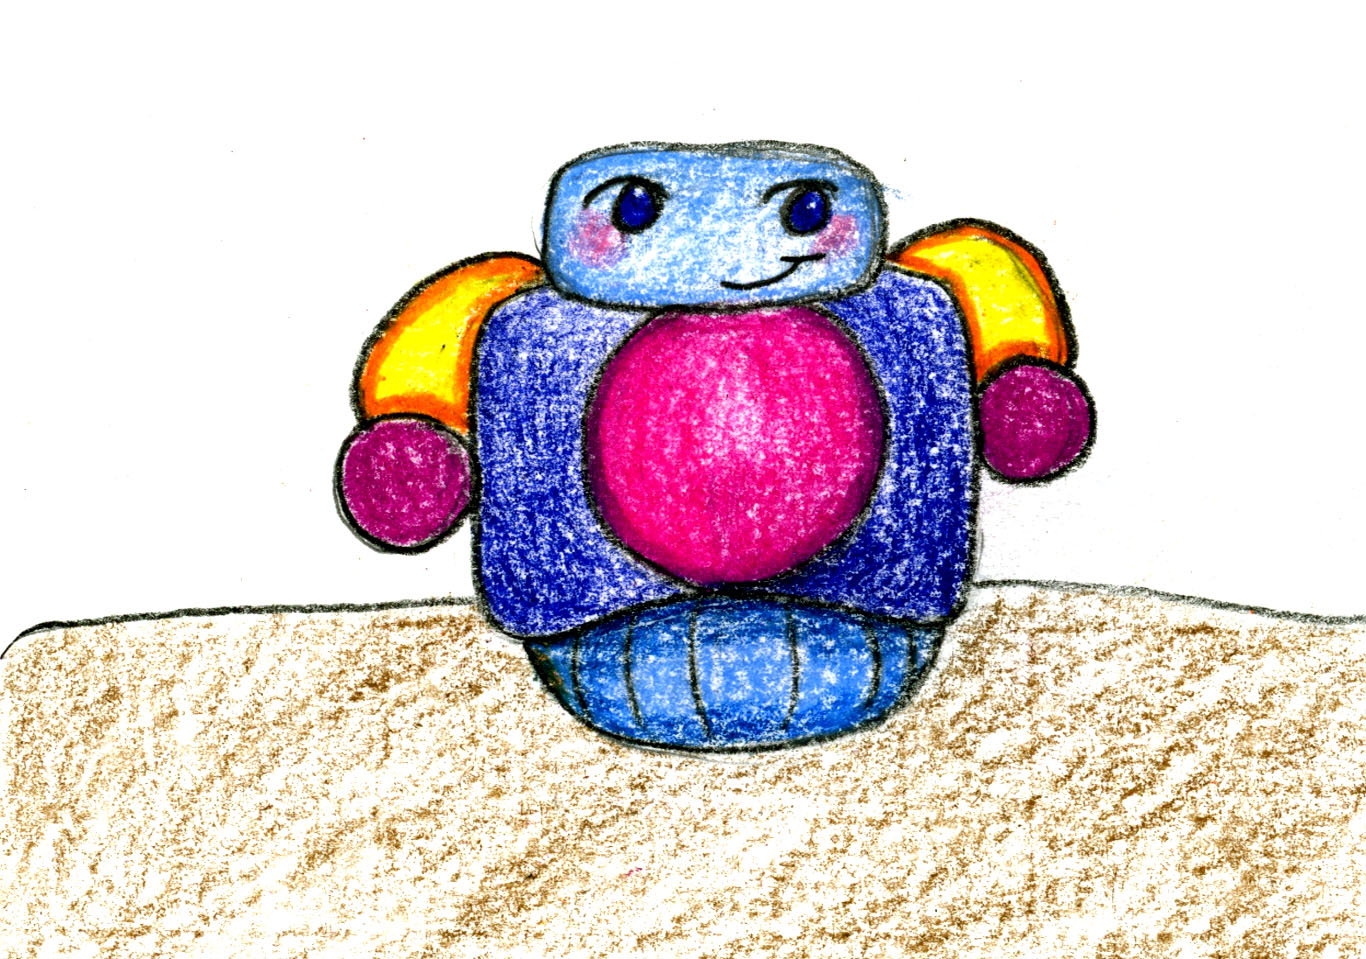 Roly Robot toy